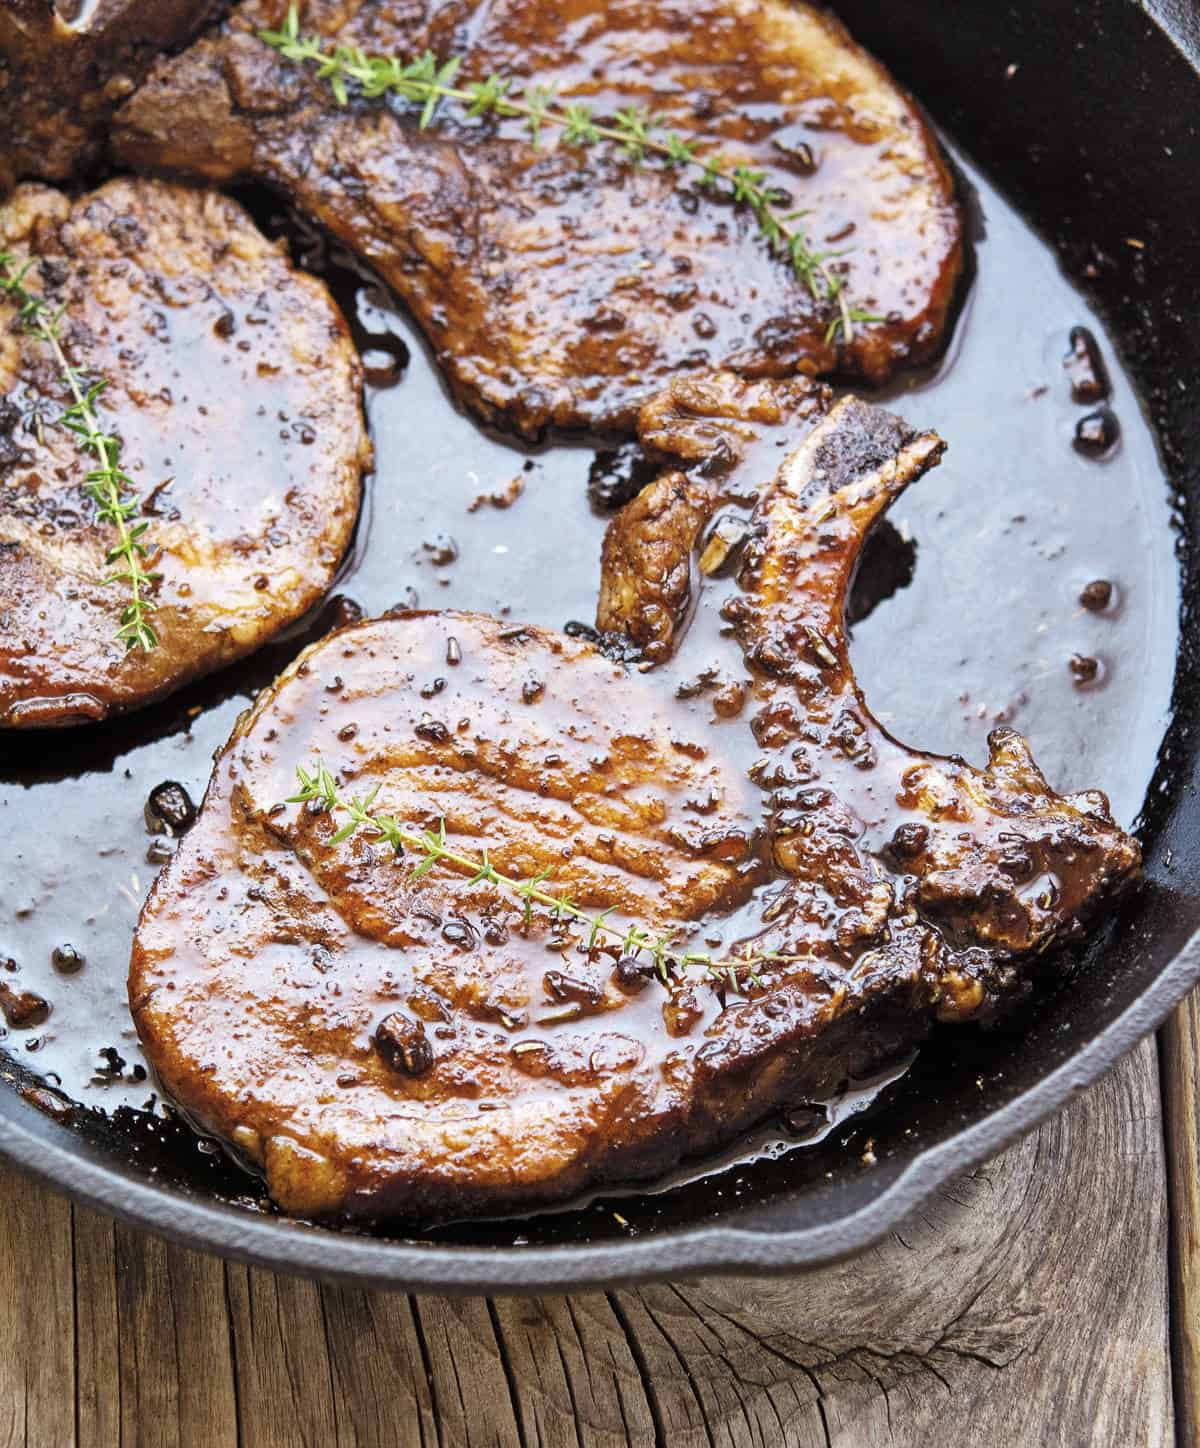 sweet-and-sour-pork-chops